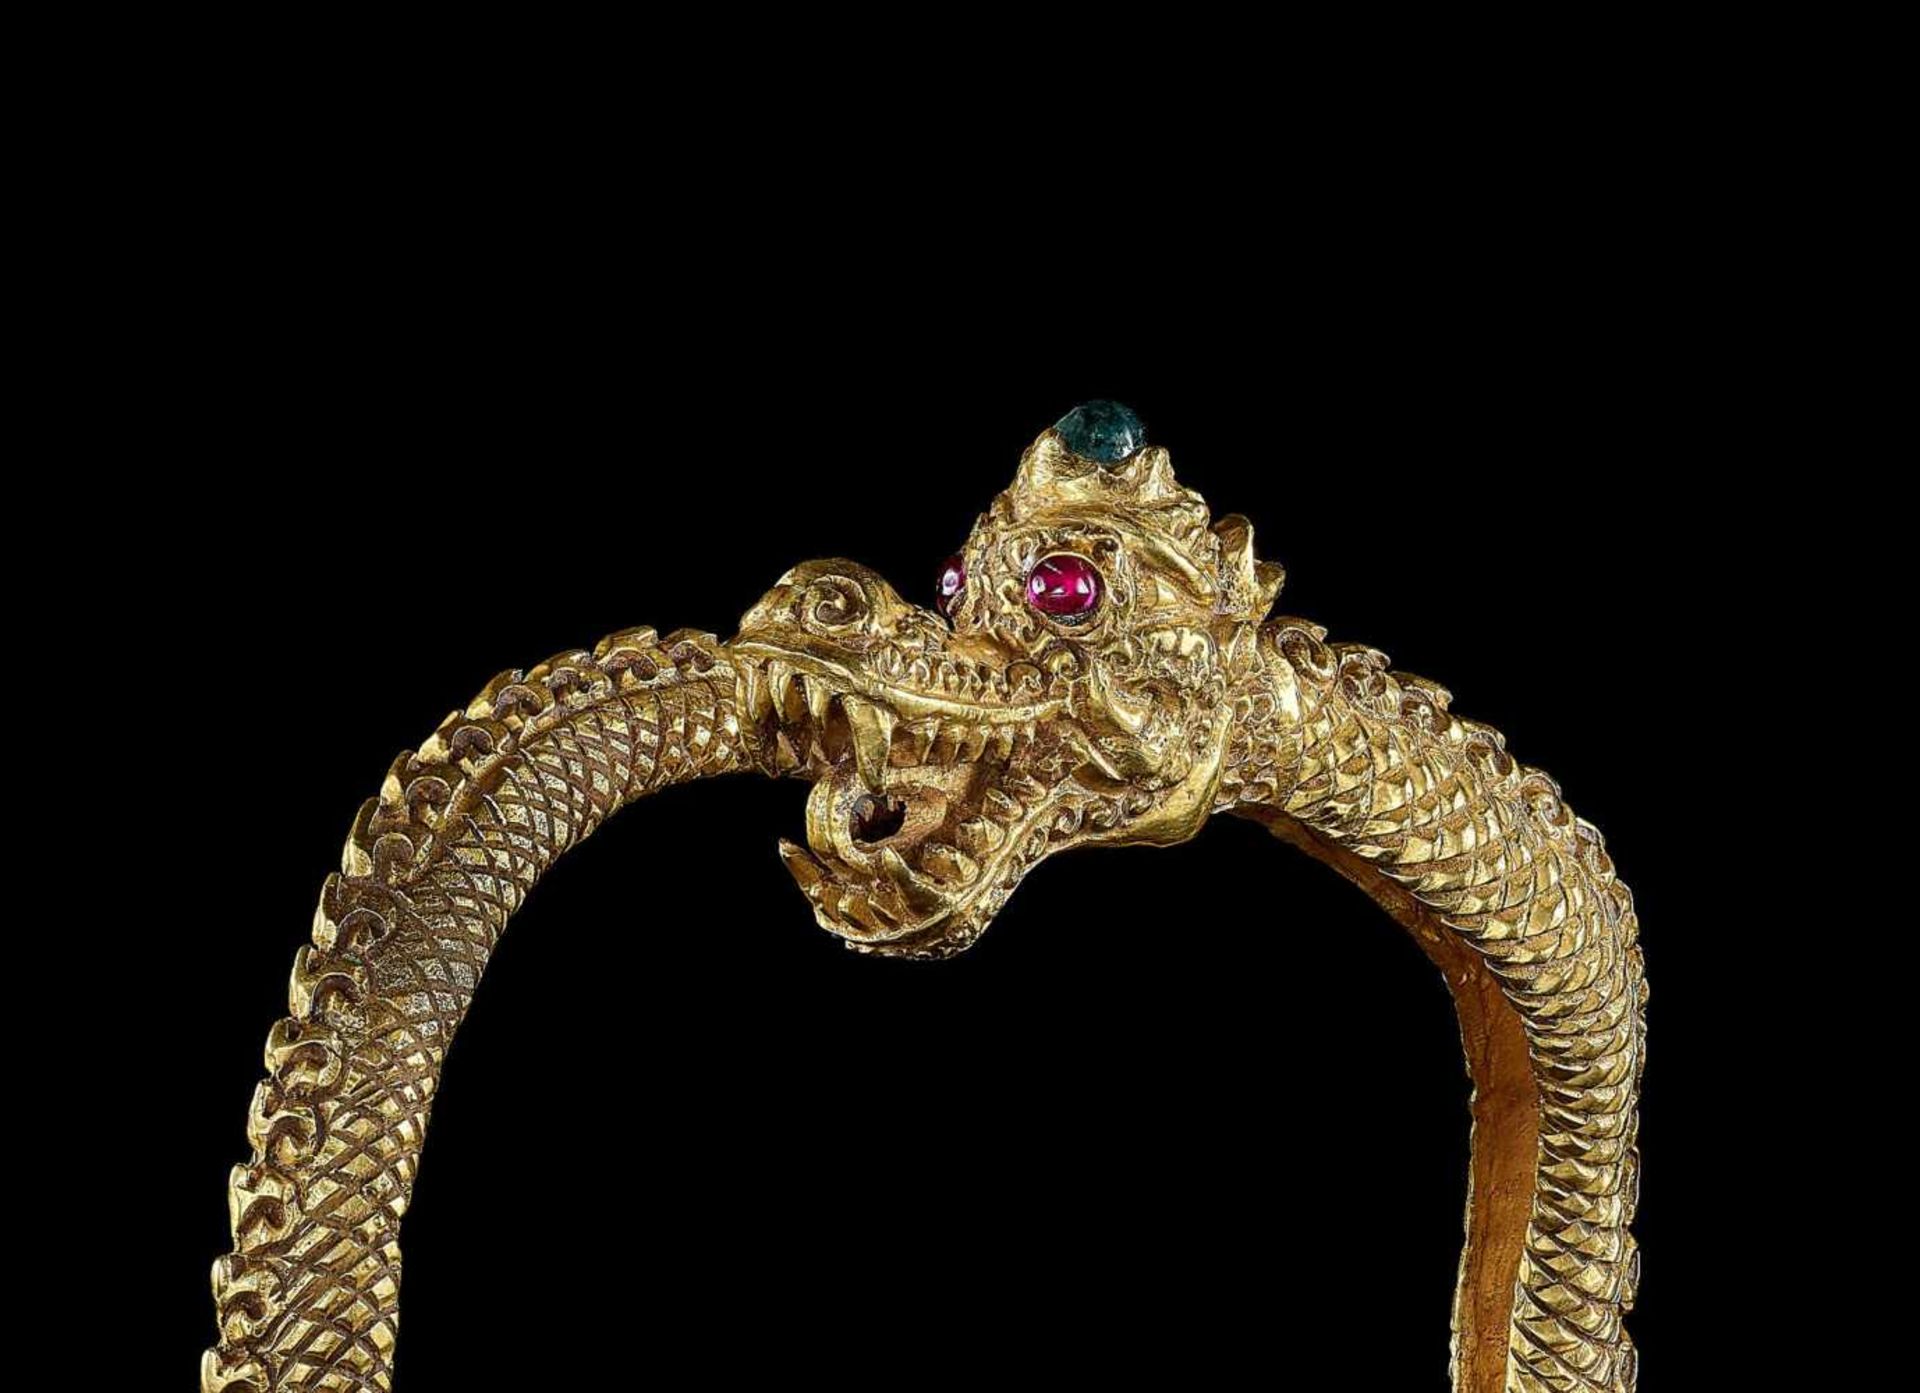 A GOLD DRAGON BANGLE WITH RUBY EYES AND A GREEN GEMSTONE Malaysia, c. 18th – 19th century. An - Image 6 of 6